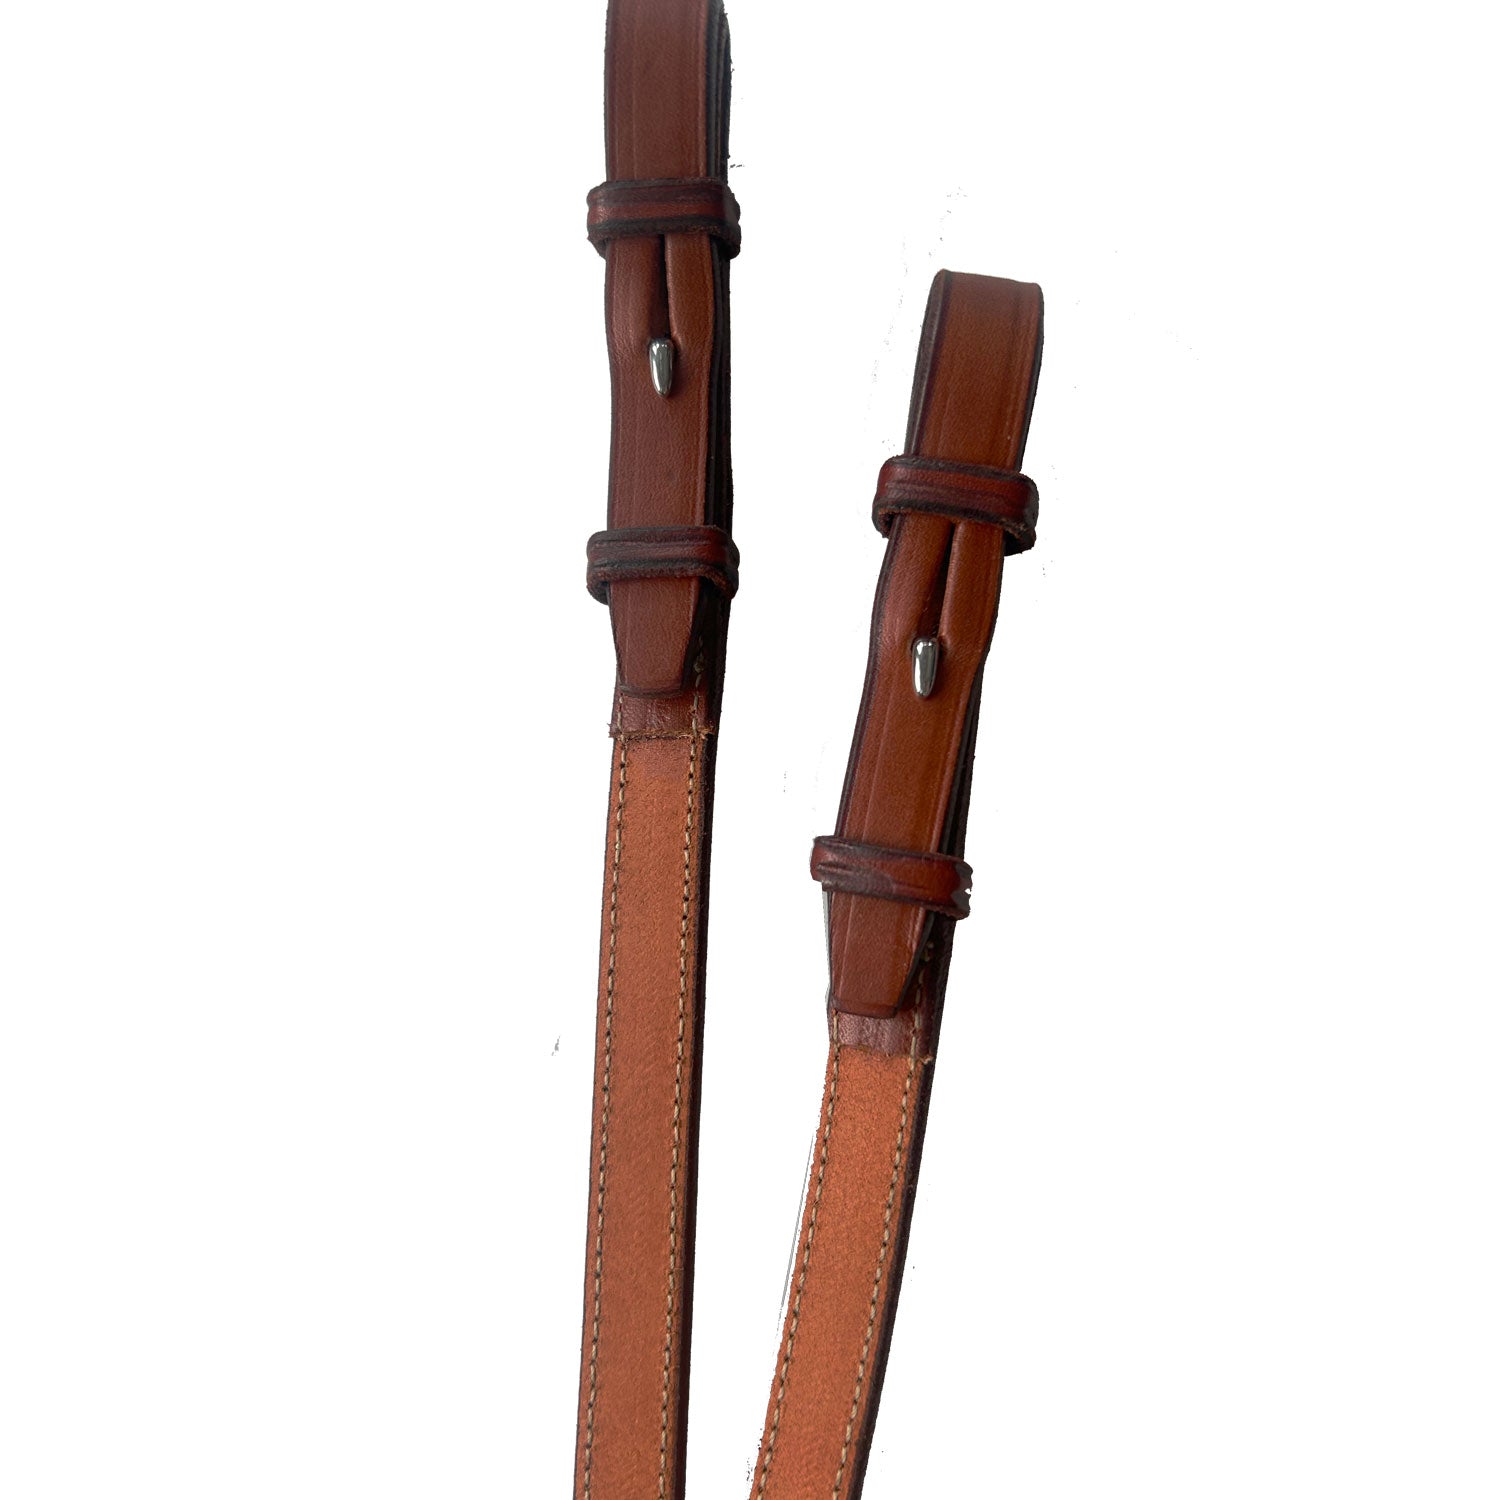 Edgewood 5/8" Fancy Stitched Laced Reins